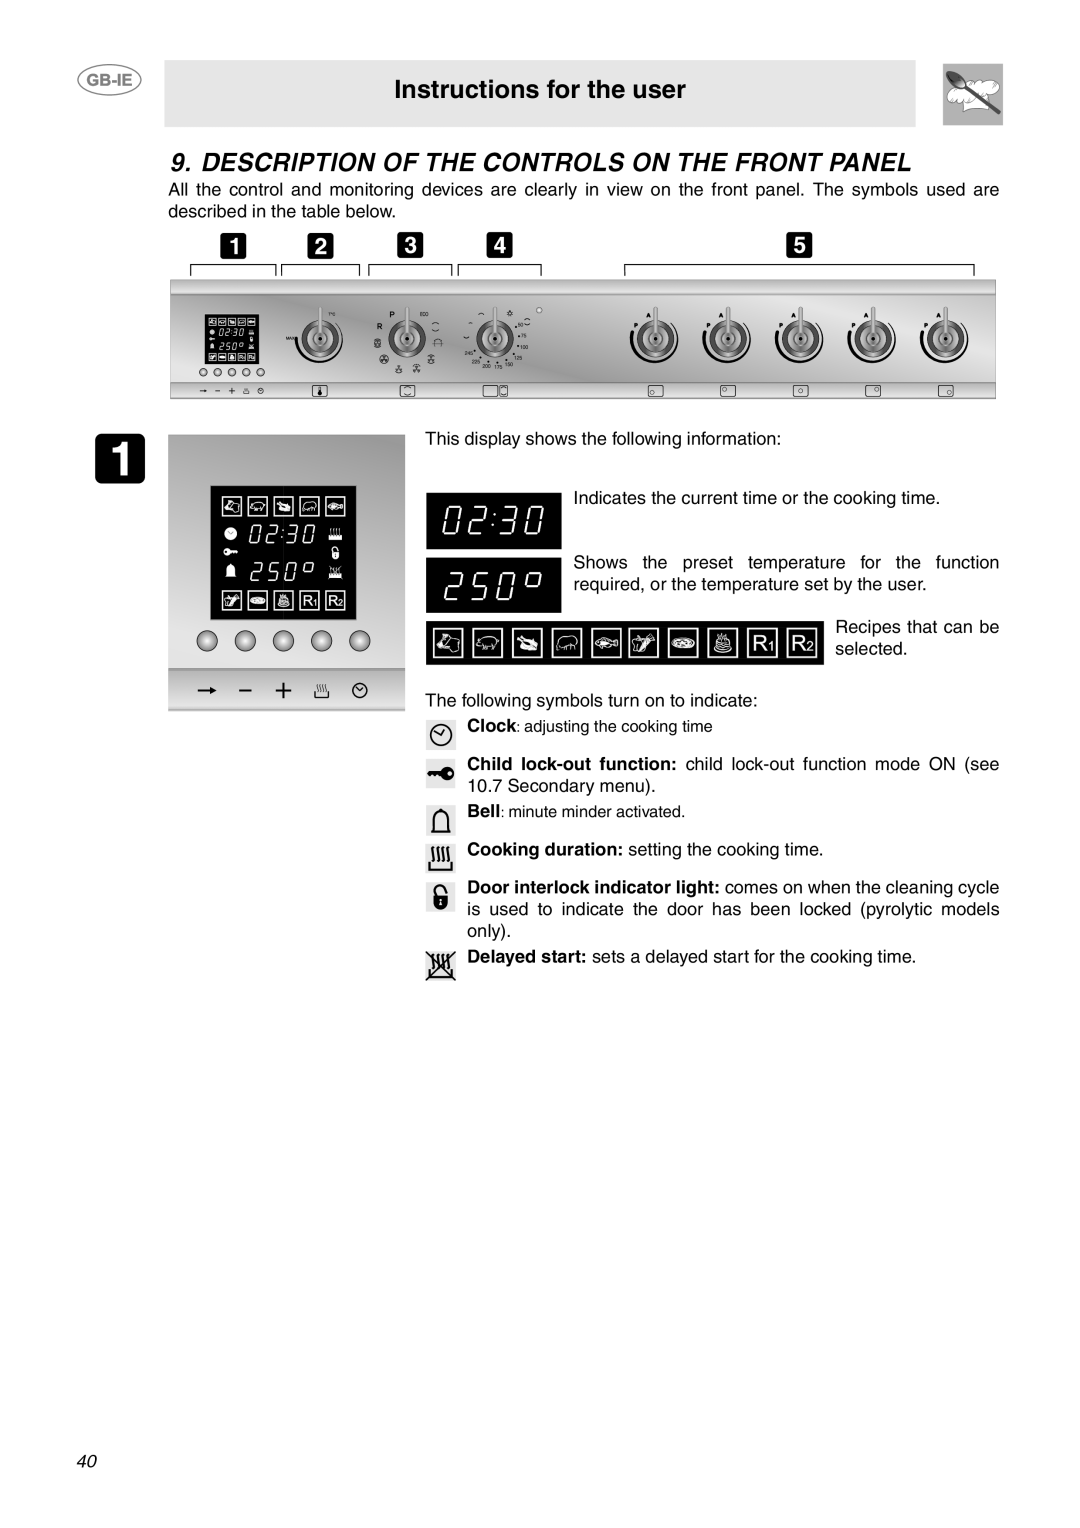 Smeg CE92IPX manual Description Of The Controls On The Front Panel, Instructions for the user 